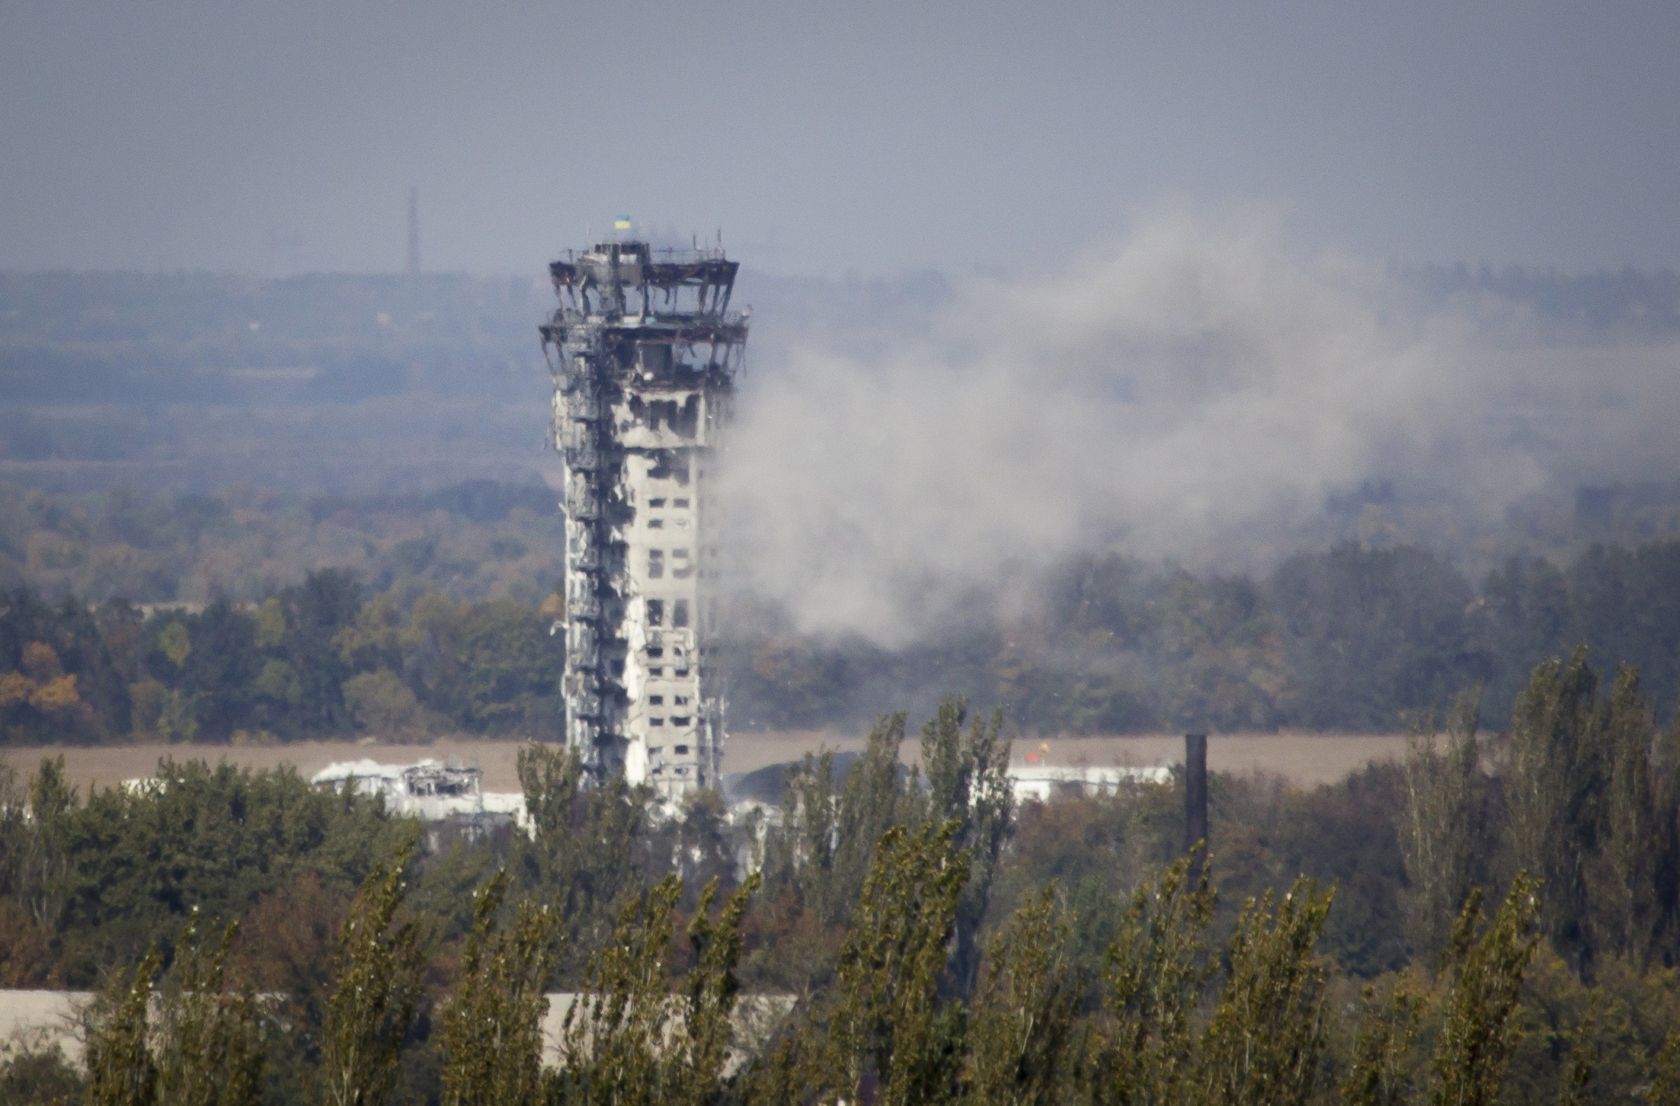 Dispatching tower in Donetsk airport with Ukrainian flag on top